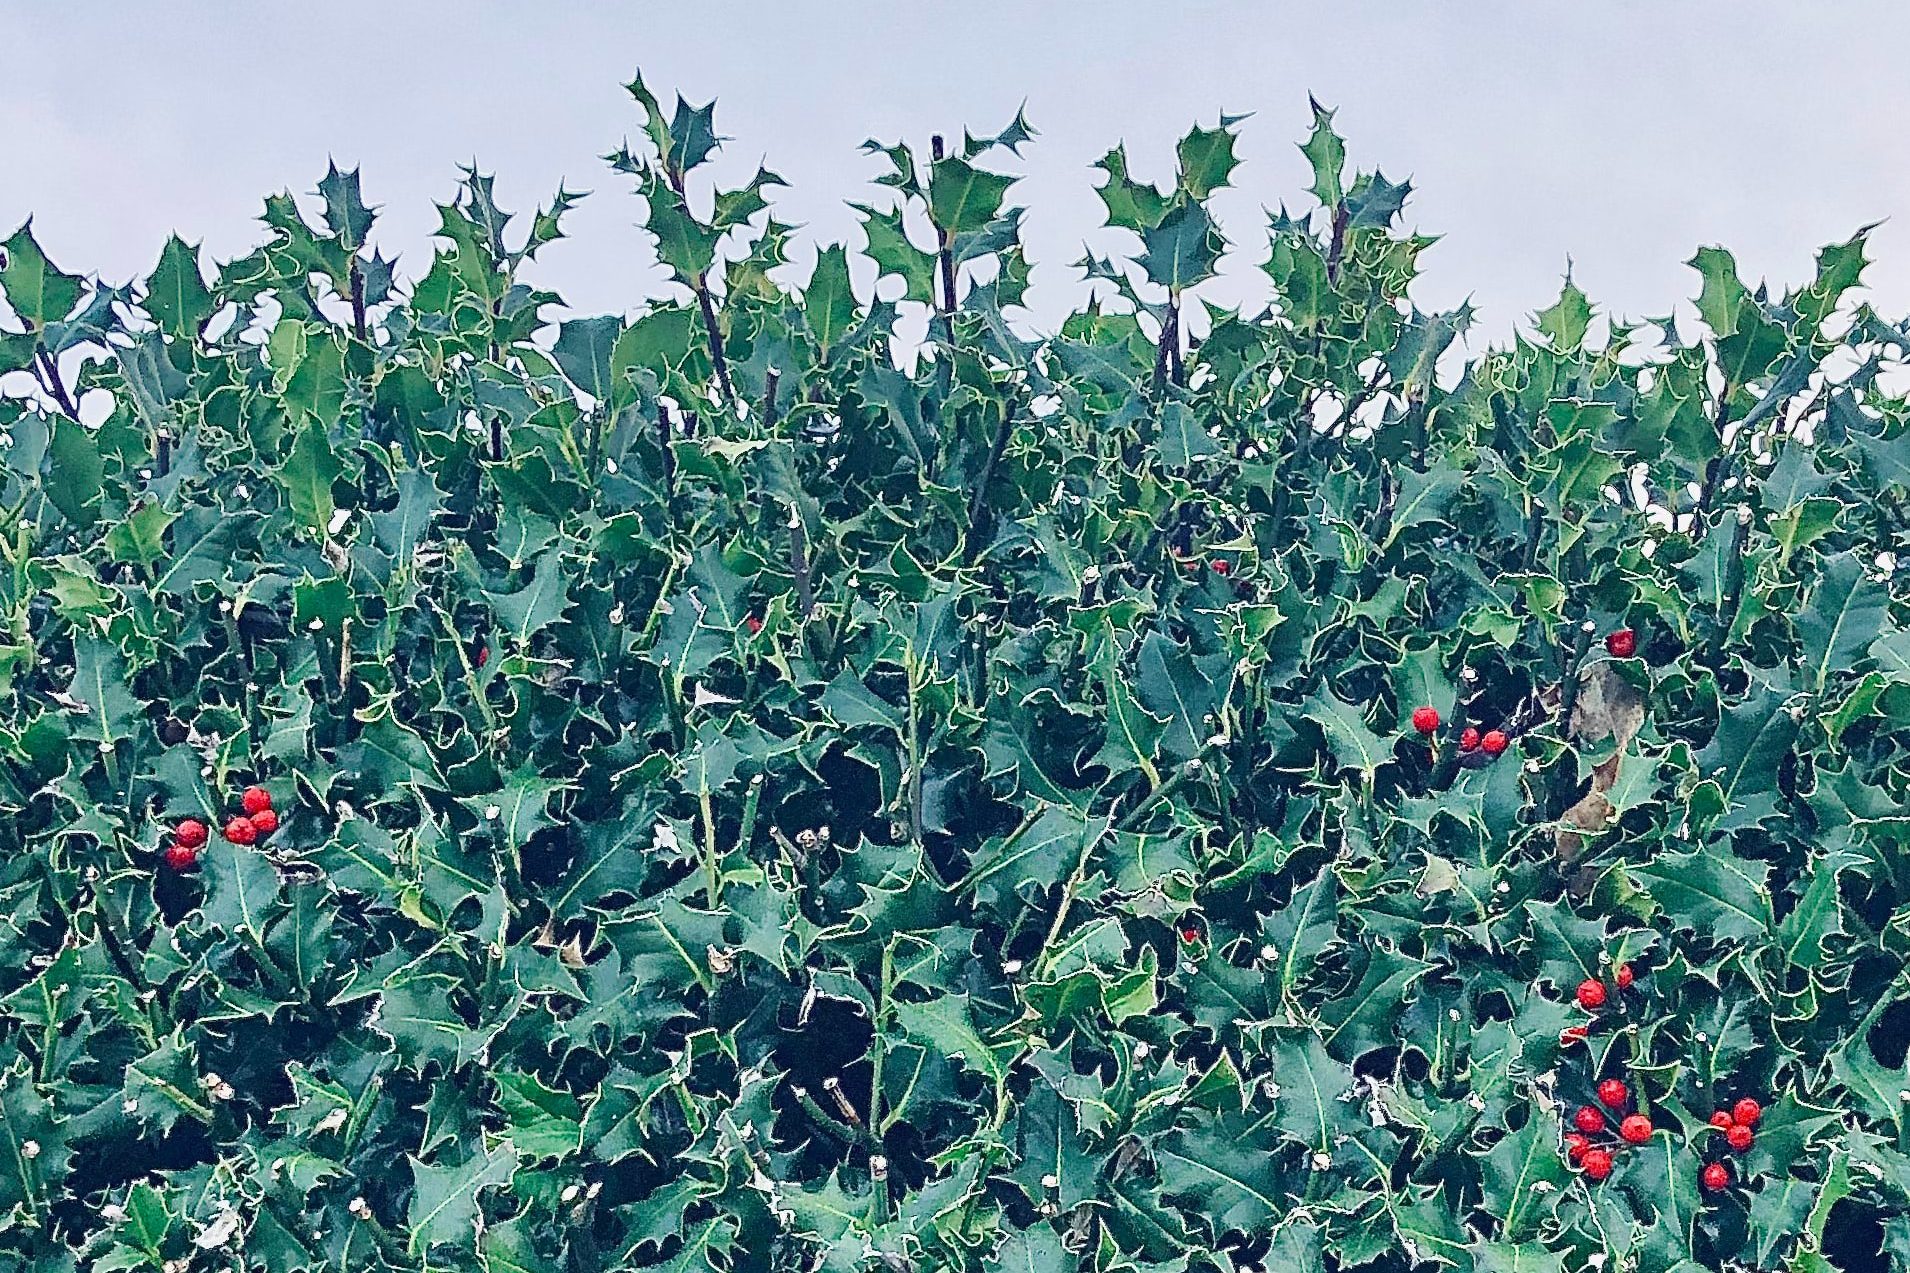 A dense Holly hedge, some plants have berries on